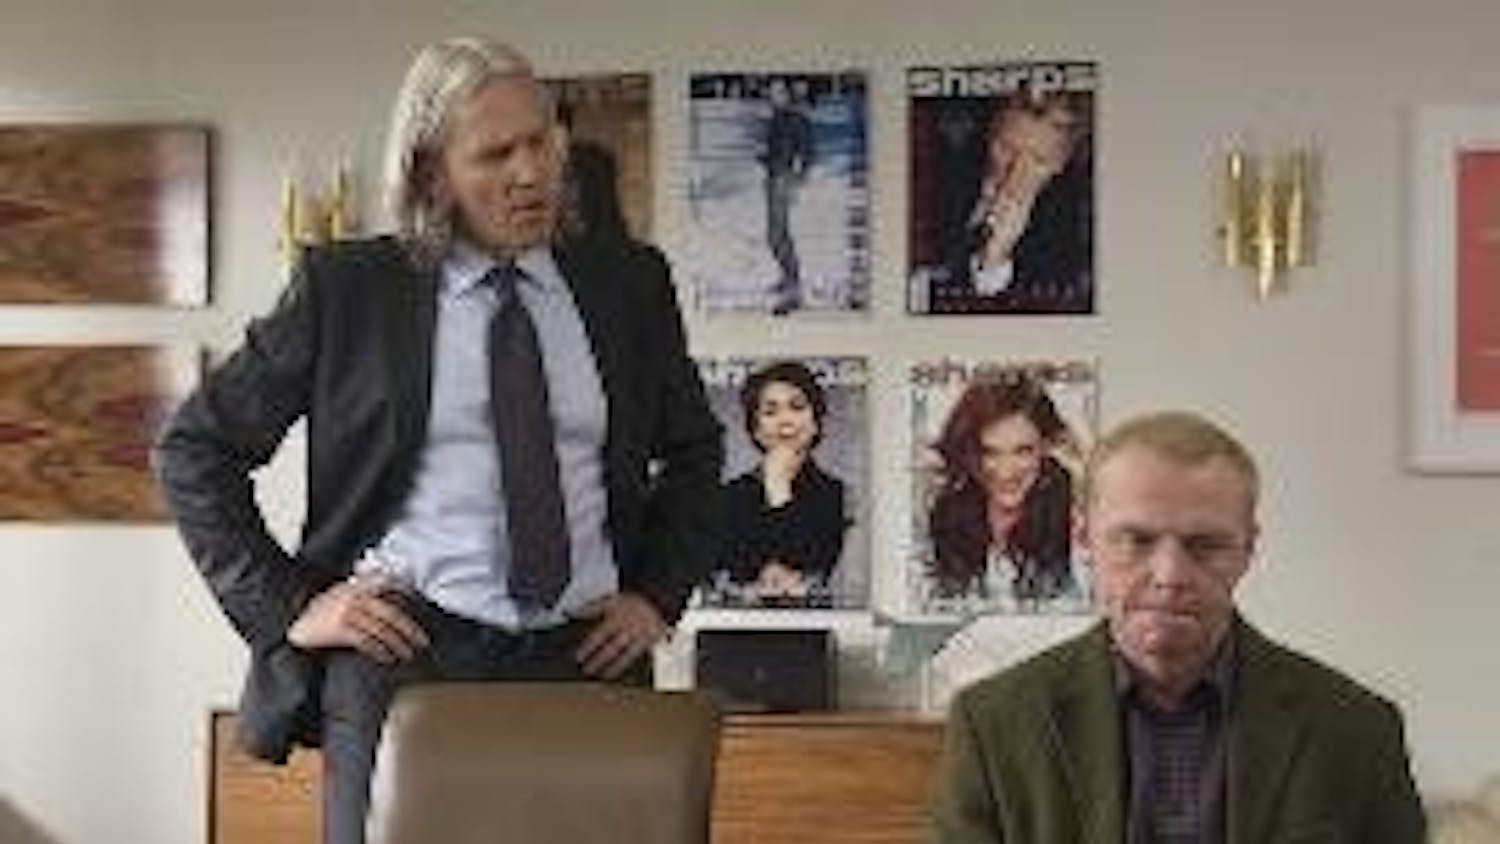 BURNING BRIDGES - Jeff Bridges of "Big Lebowski" fame joins funny man Simon Pegg of the British comedy-slashers "Shaun of the Dead" and "Hot Fuzz" in "How to Lose Friends and Alienate People," which hits theaters Oct. 3.